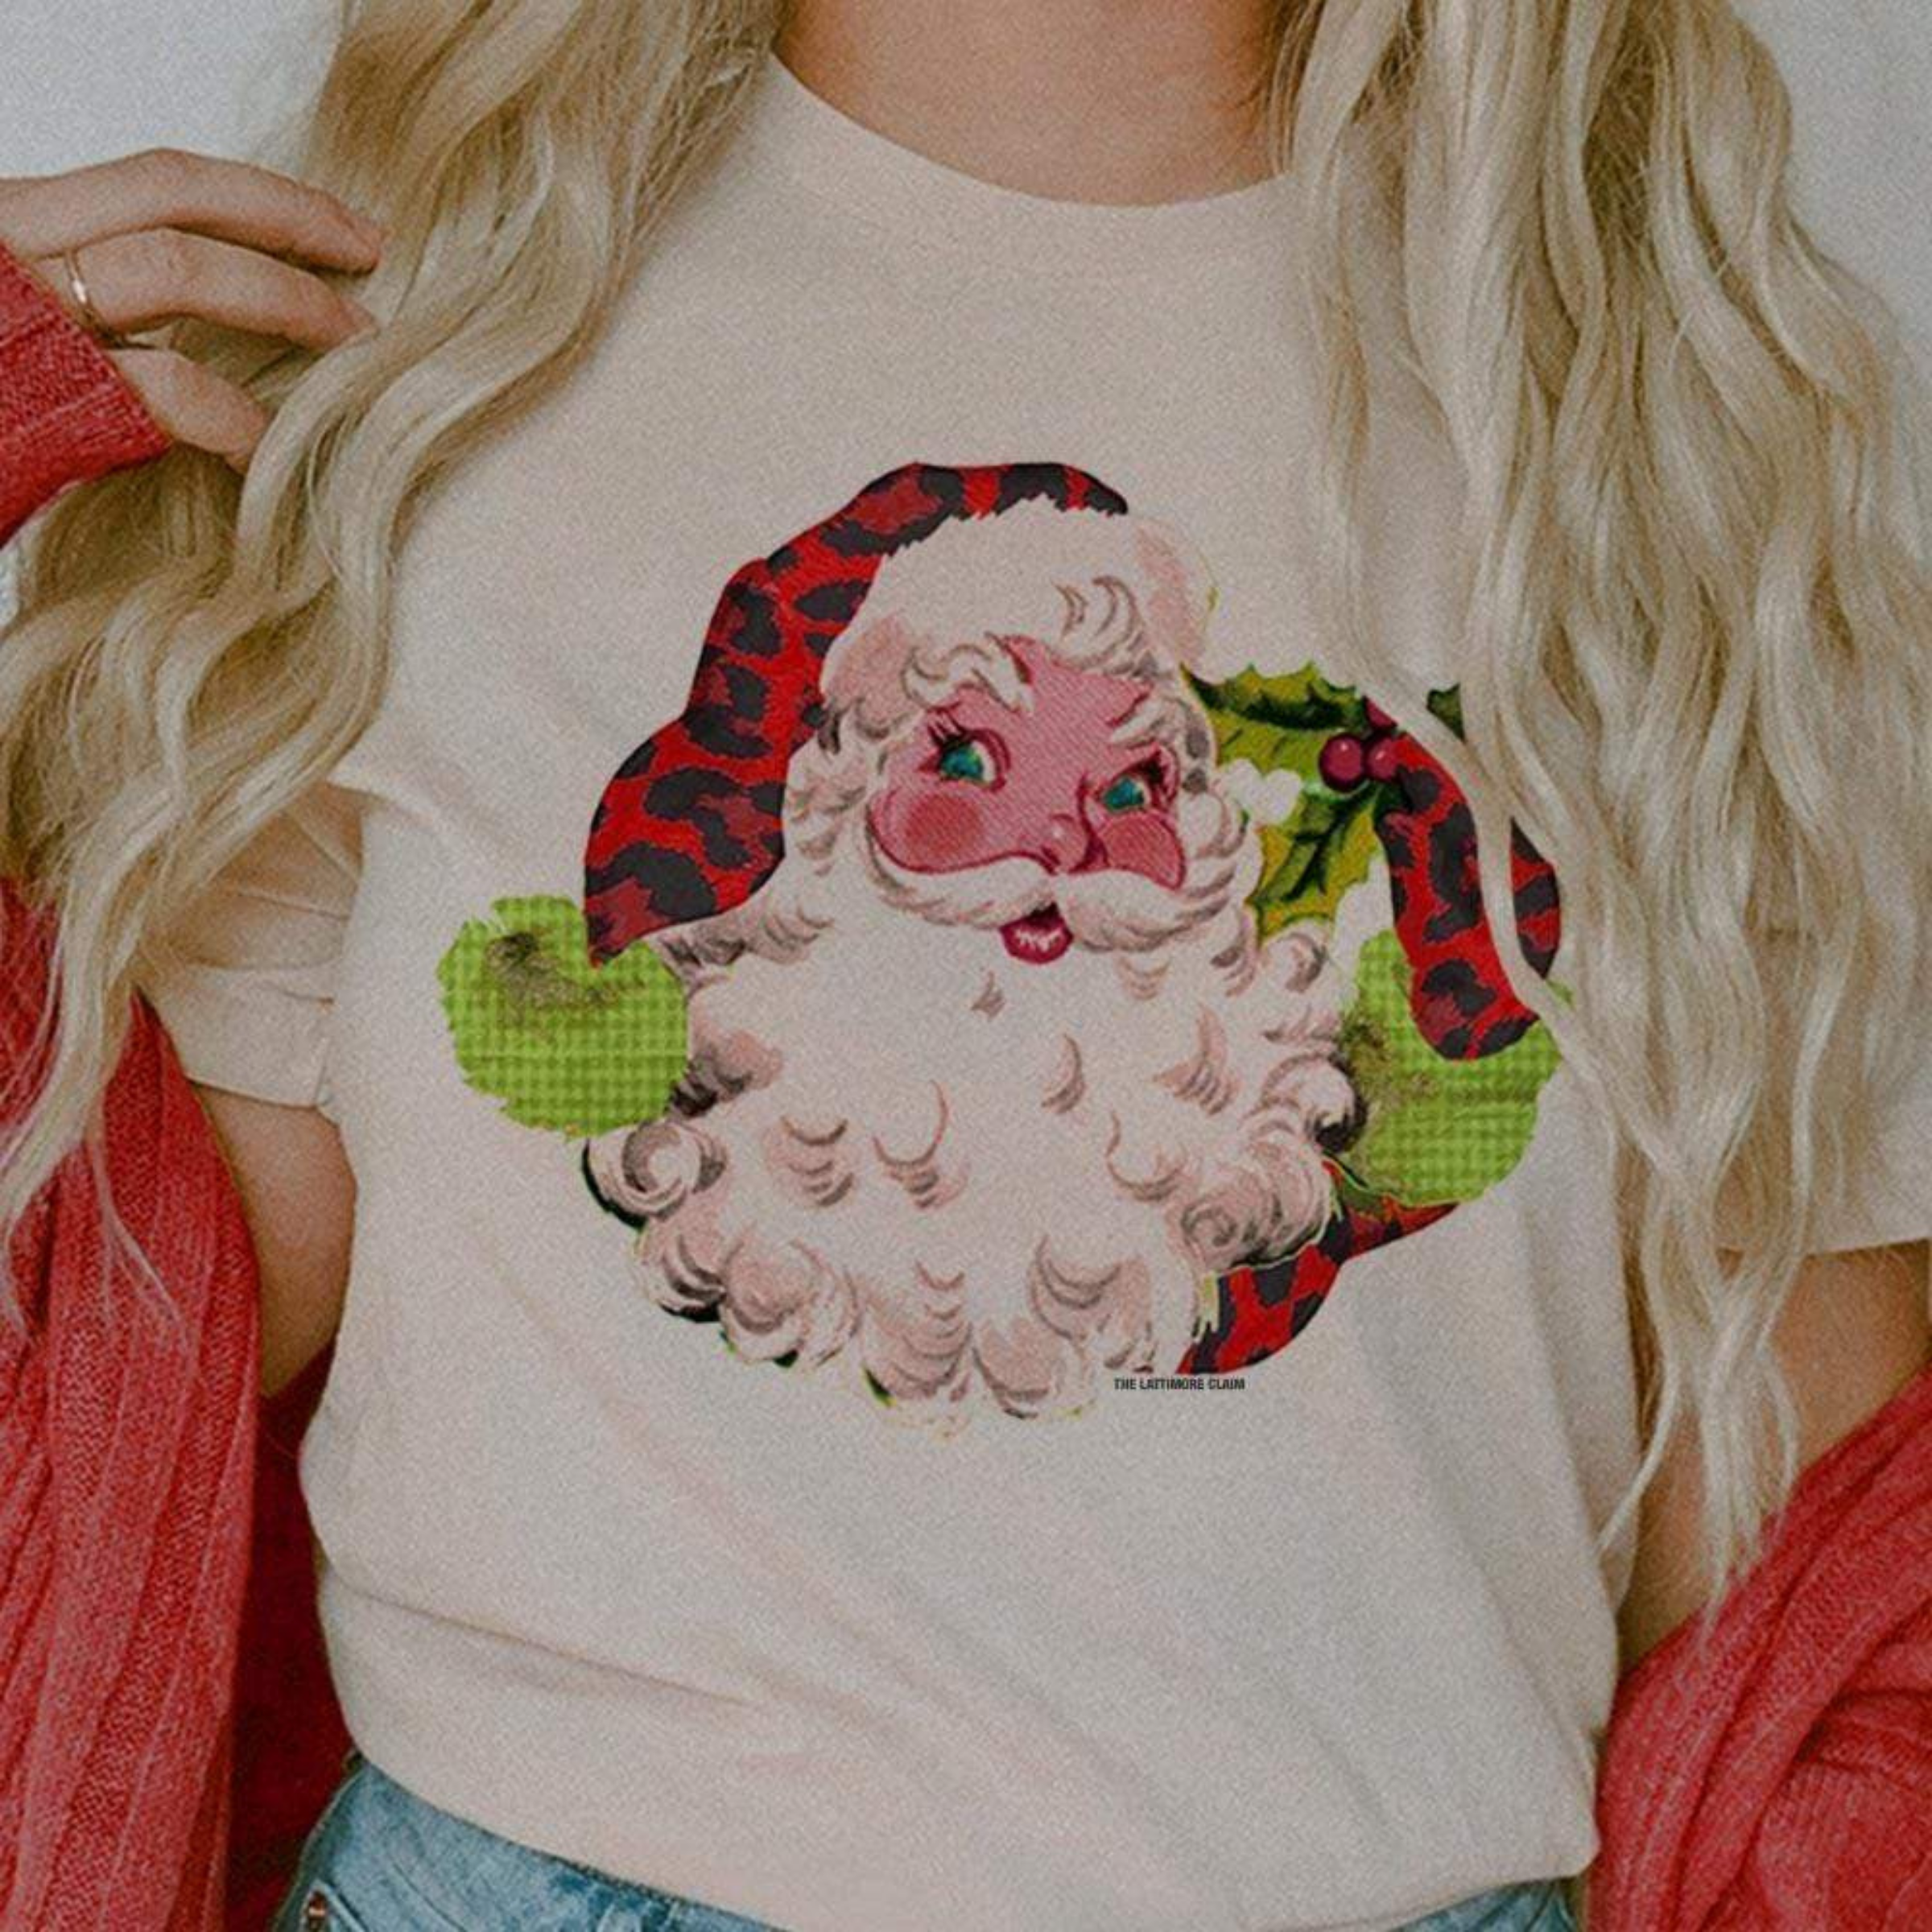 This cream tee includes a crew neckline, short sleeves, and a vintage Santa Clause graphic. Santa is wearing a red leopard print and green hat and glove. The model has this shown with rolled sleeves and a red cardigan. 